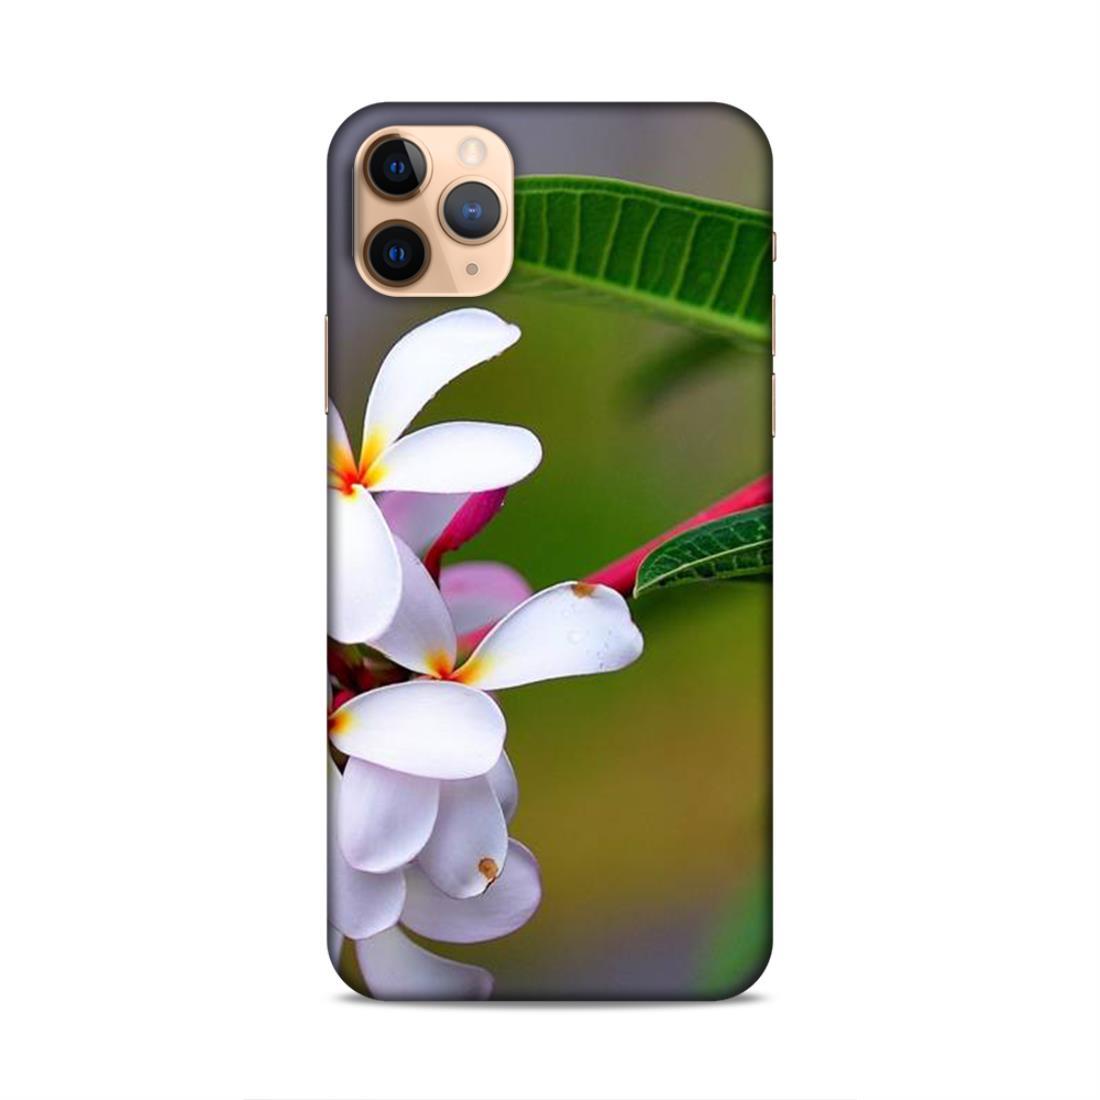 Natural White Flower iPhone 11 Pro Mobile Cover Case